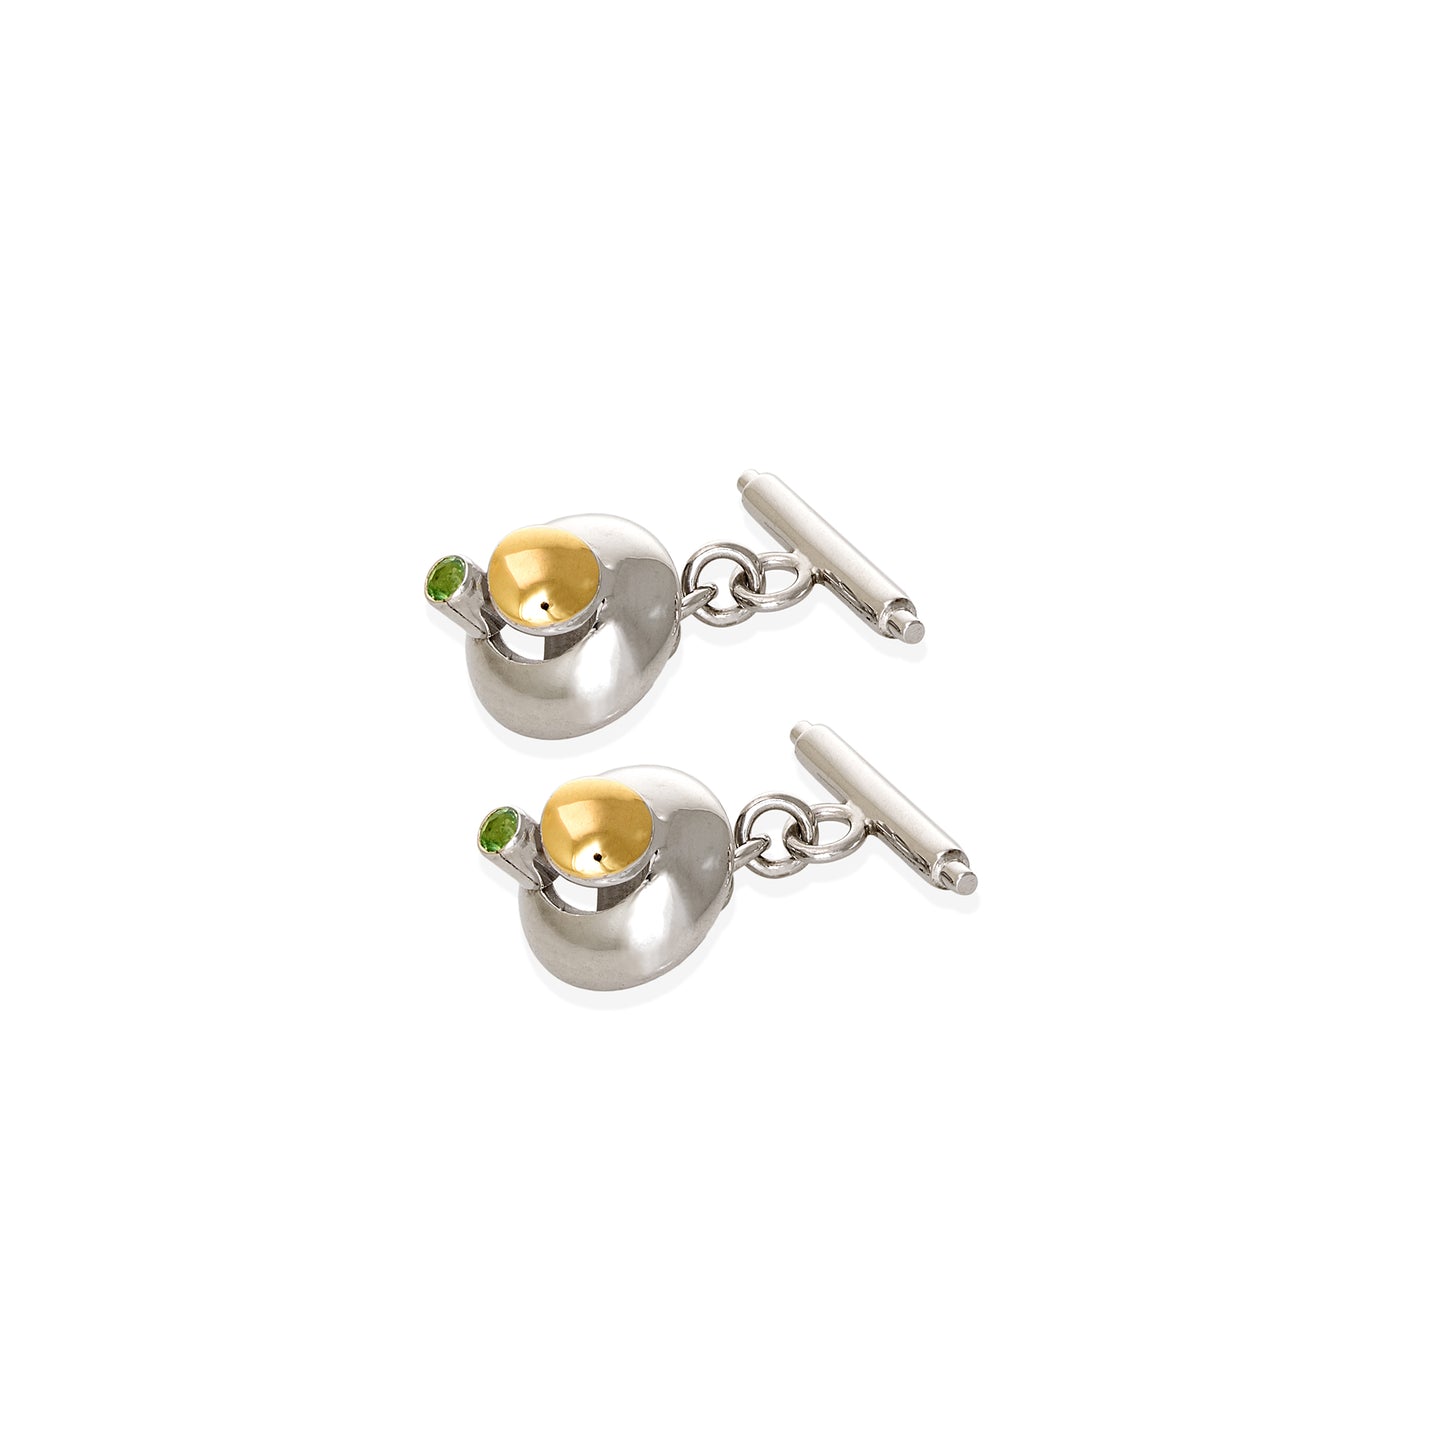 Cufflinks in silver 925 and 18 k yellow gold with peridot 1.5carat